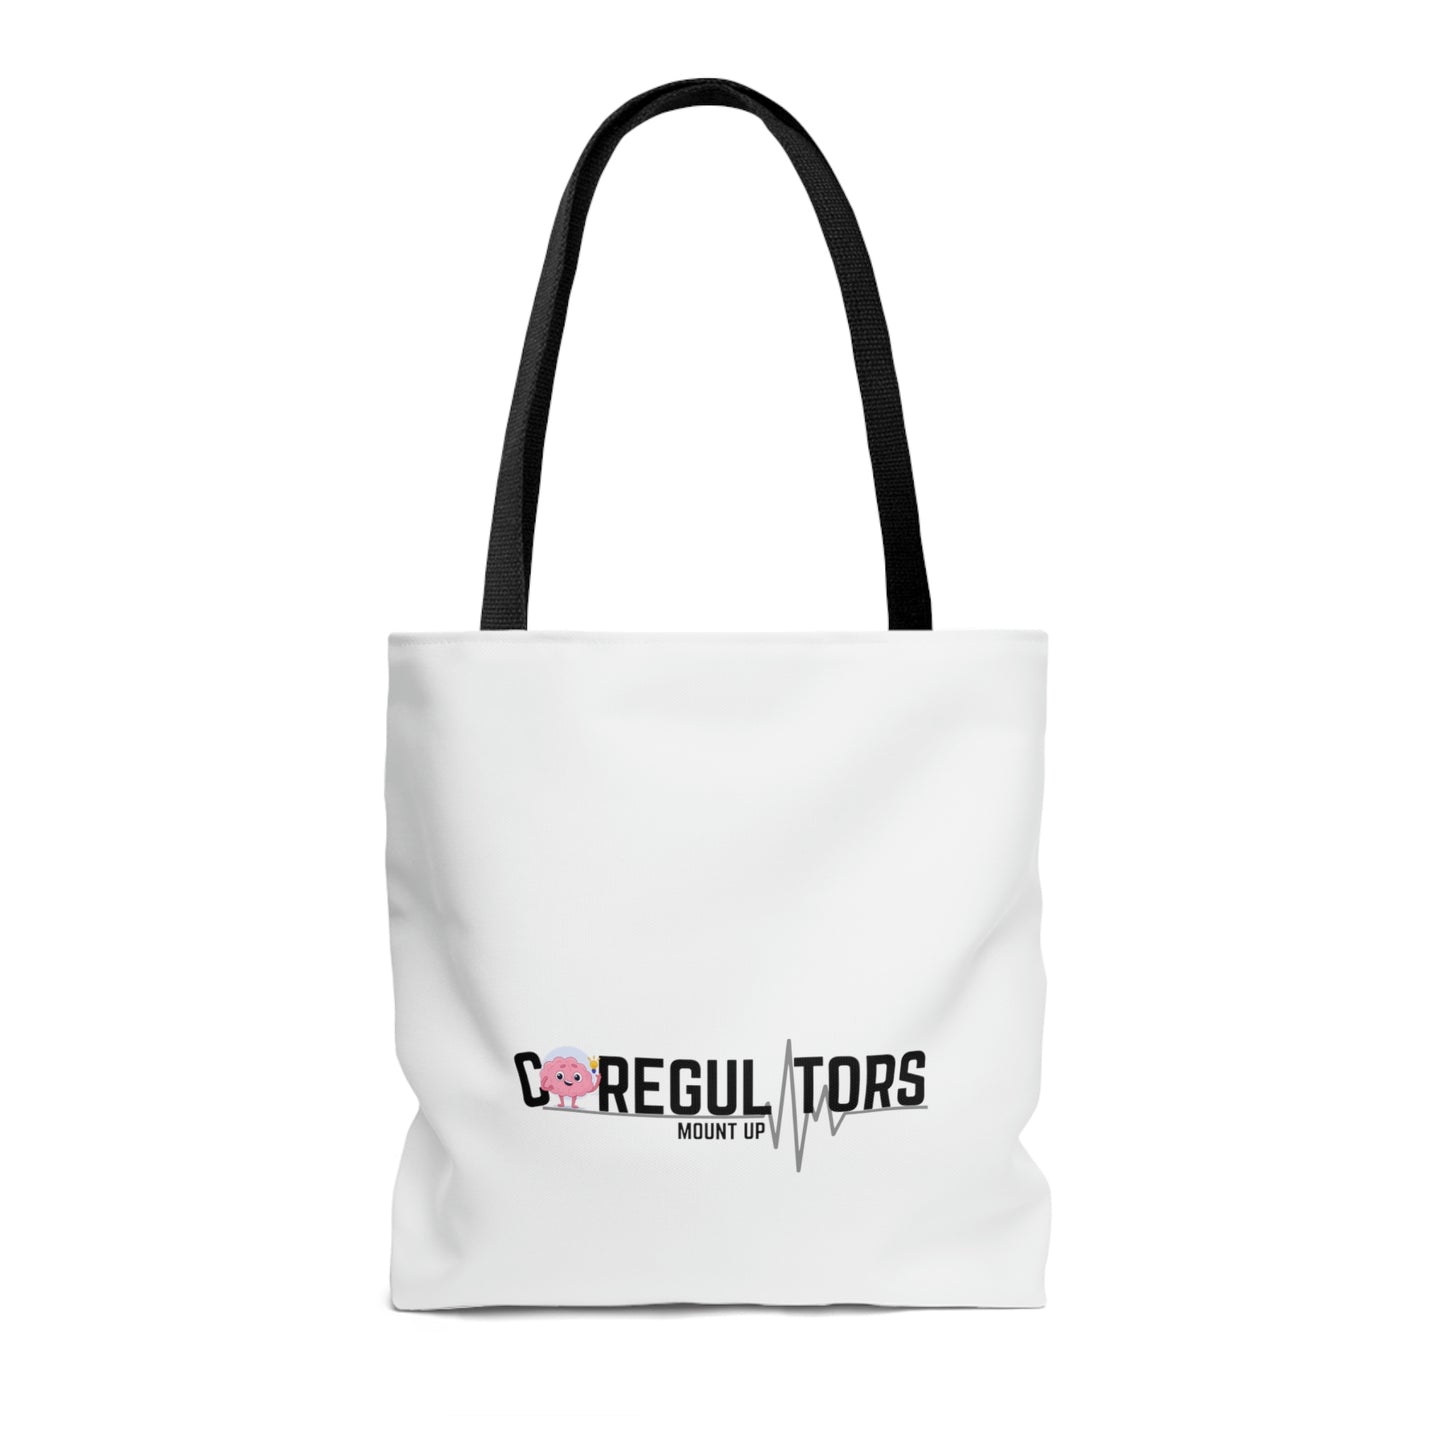 Official Co-Regulators Merch Tote Bag in 3 sizes